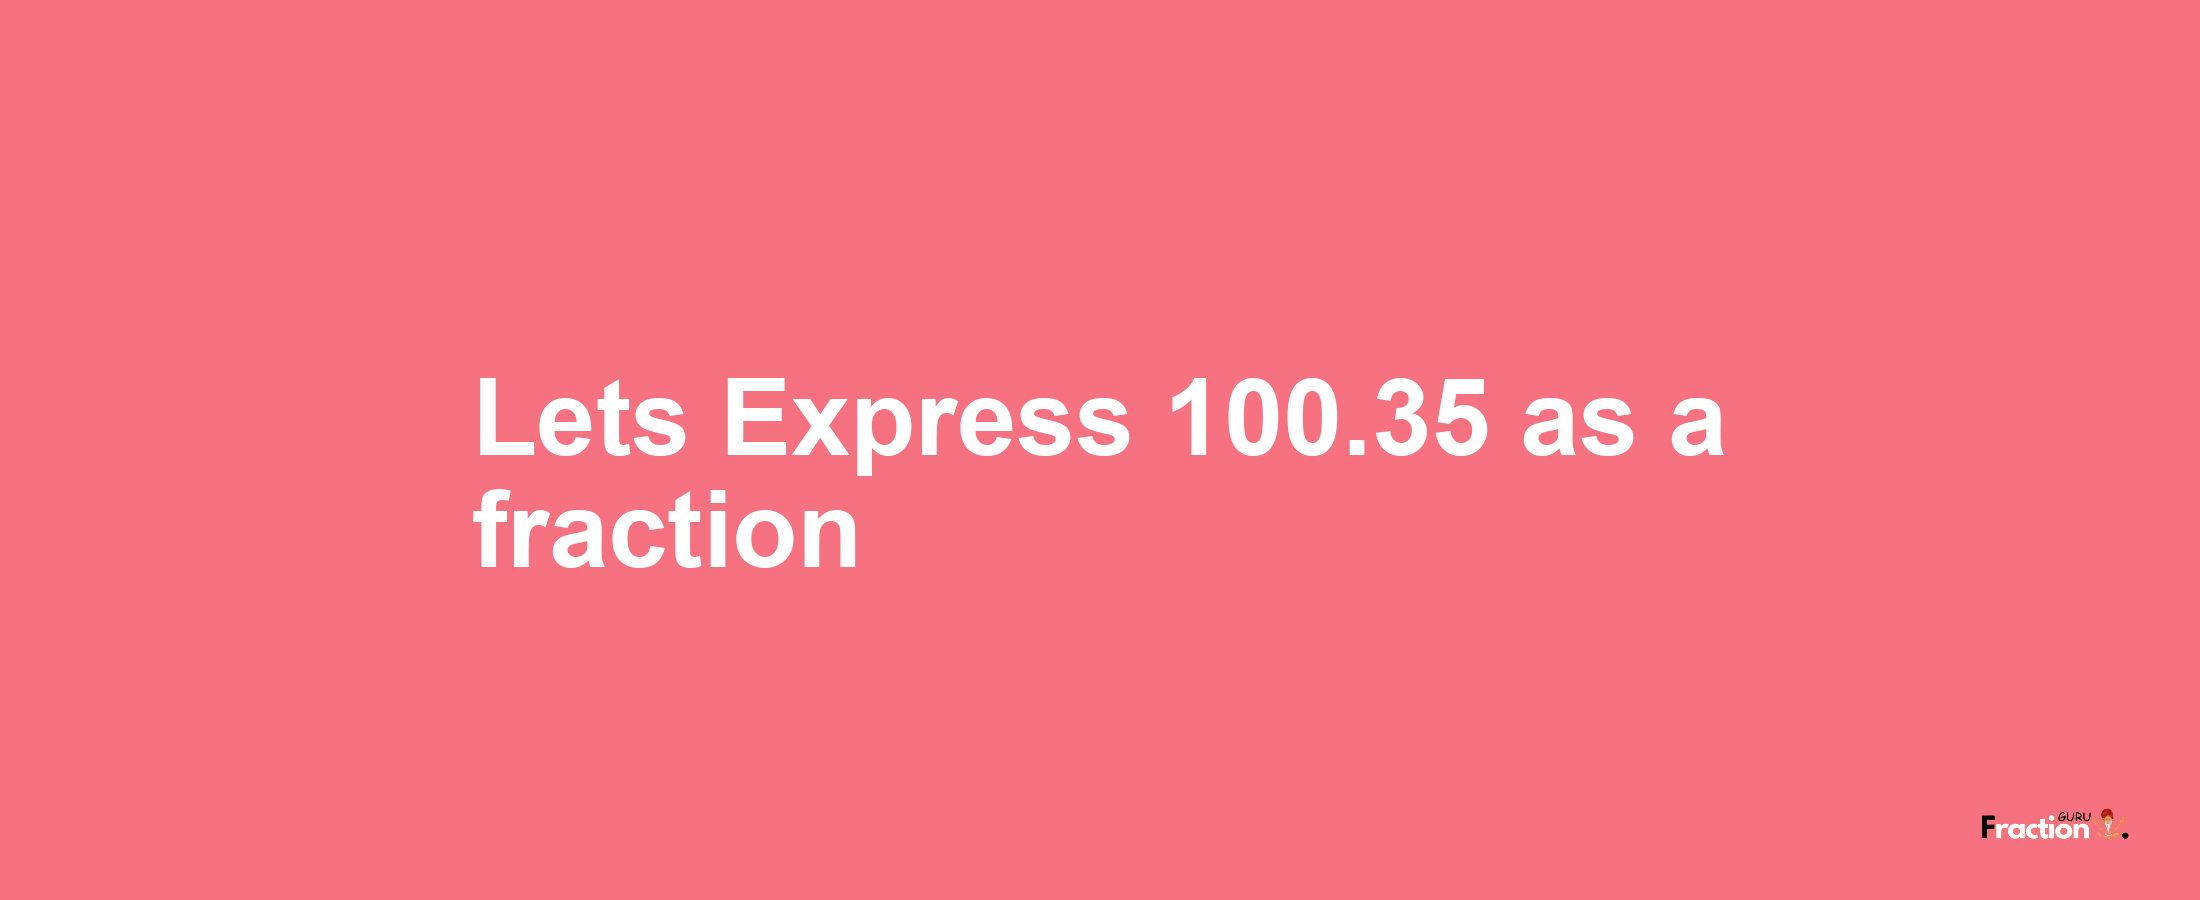 Lets Express 100.35 as afraction